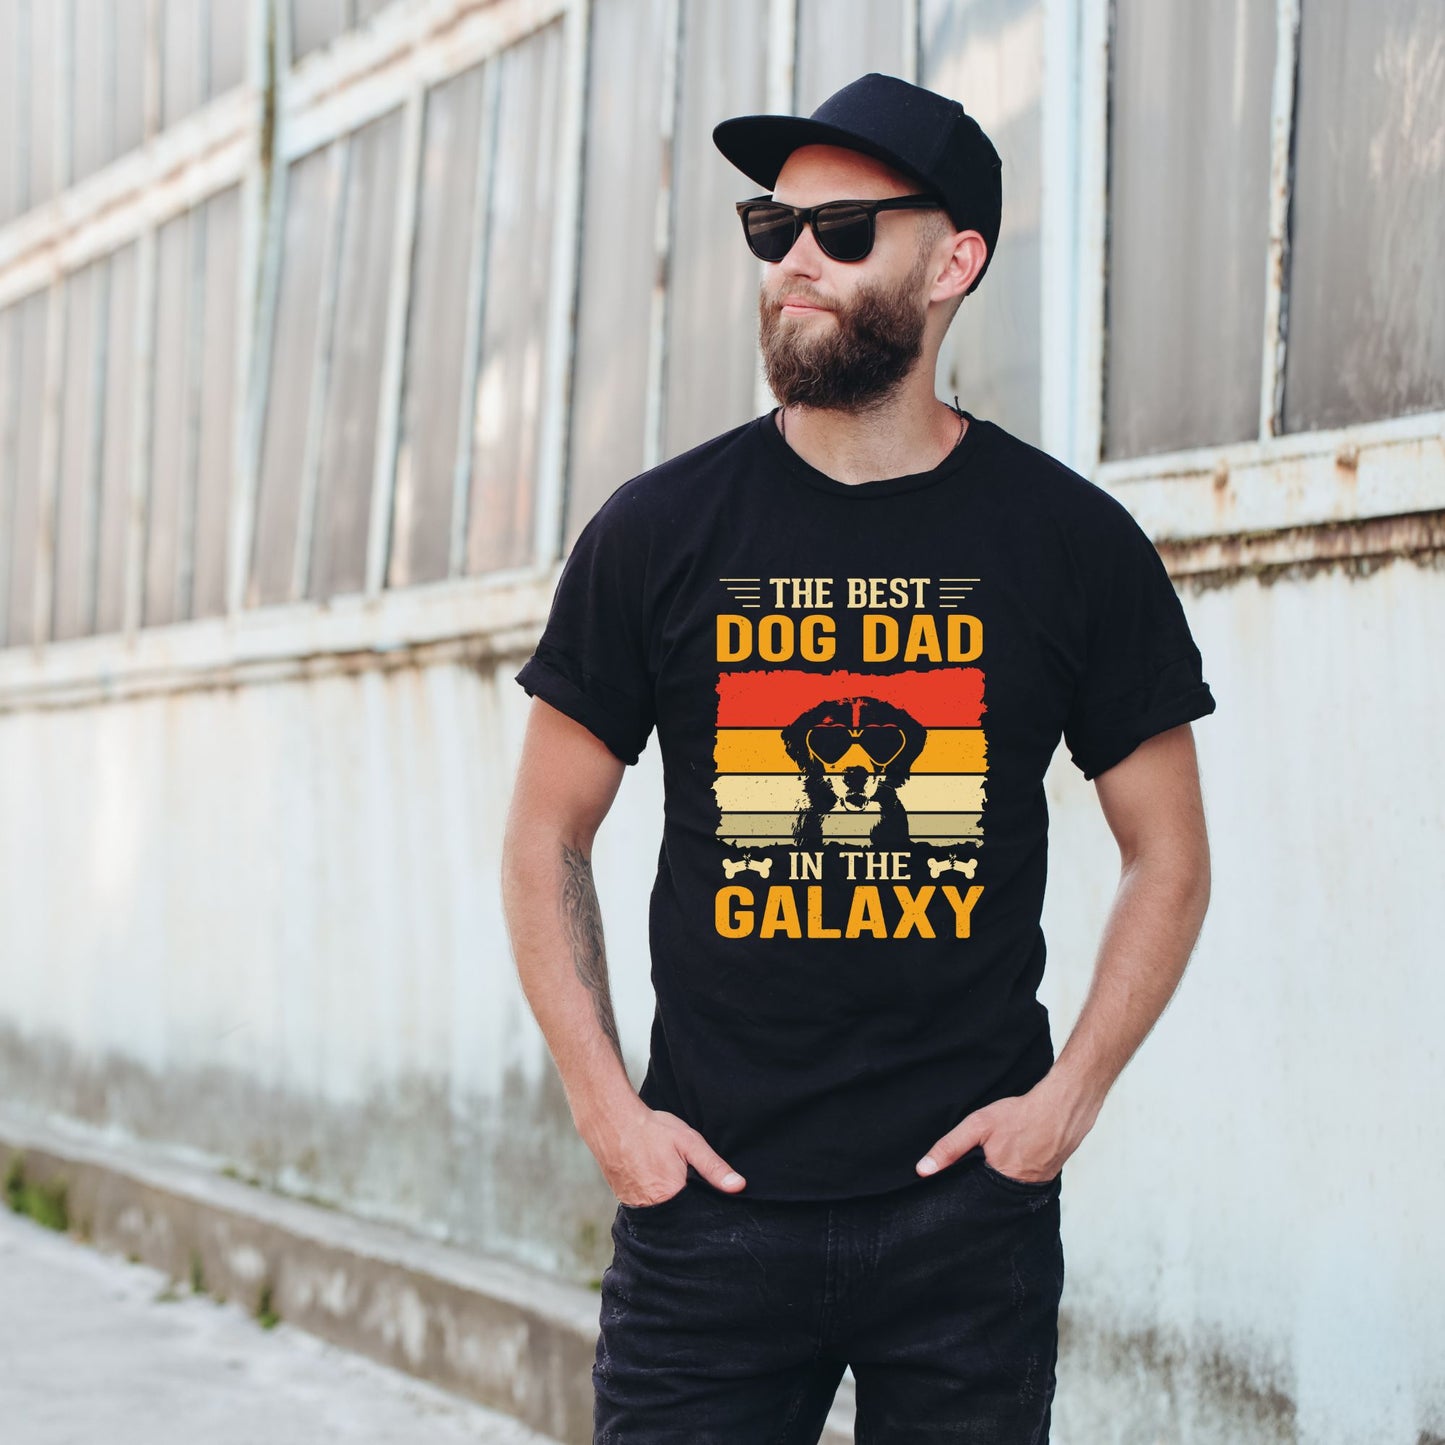 "The Best Dad in the Galaxy" - Dad Tee Shirt for Father's Day